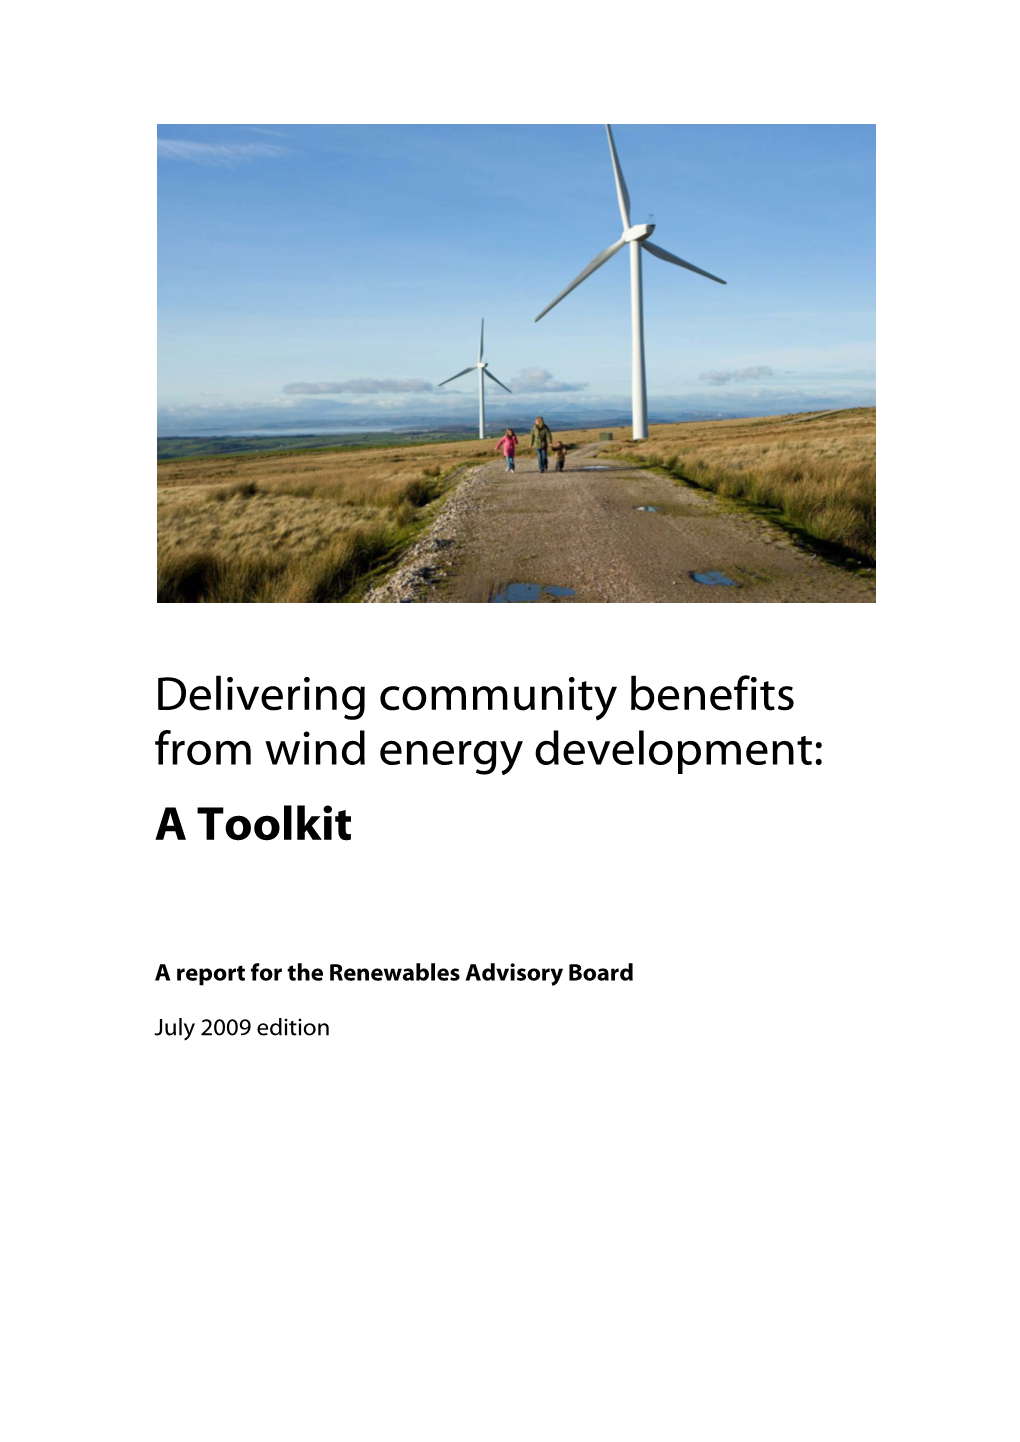 Delivering Community Benefits from Wind Energy Development